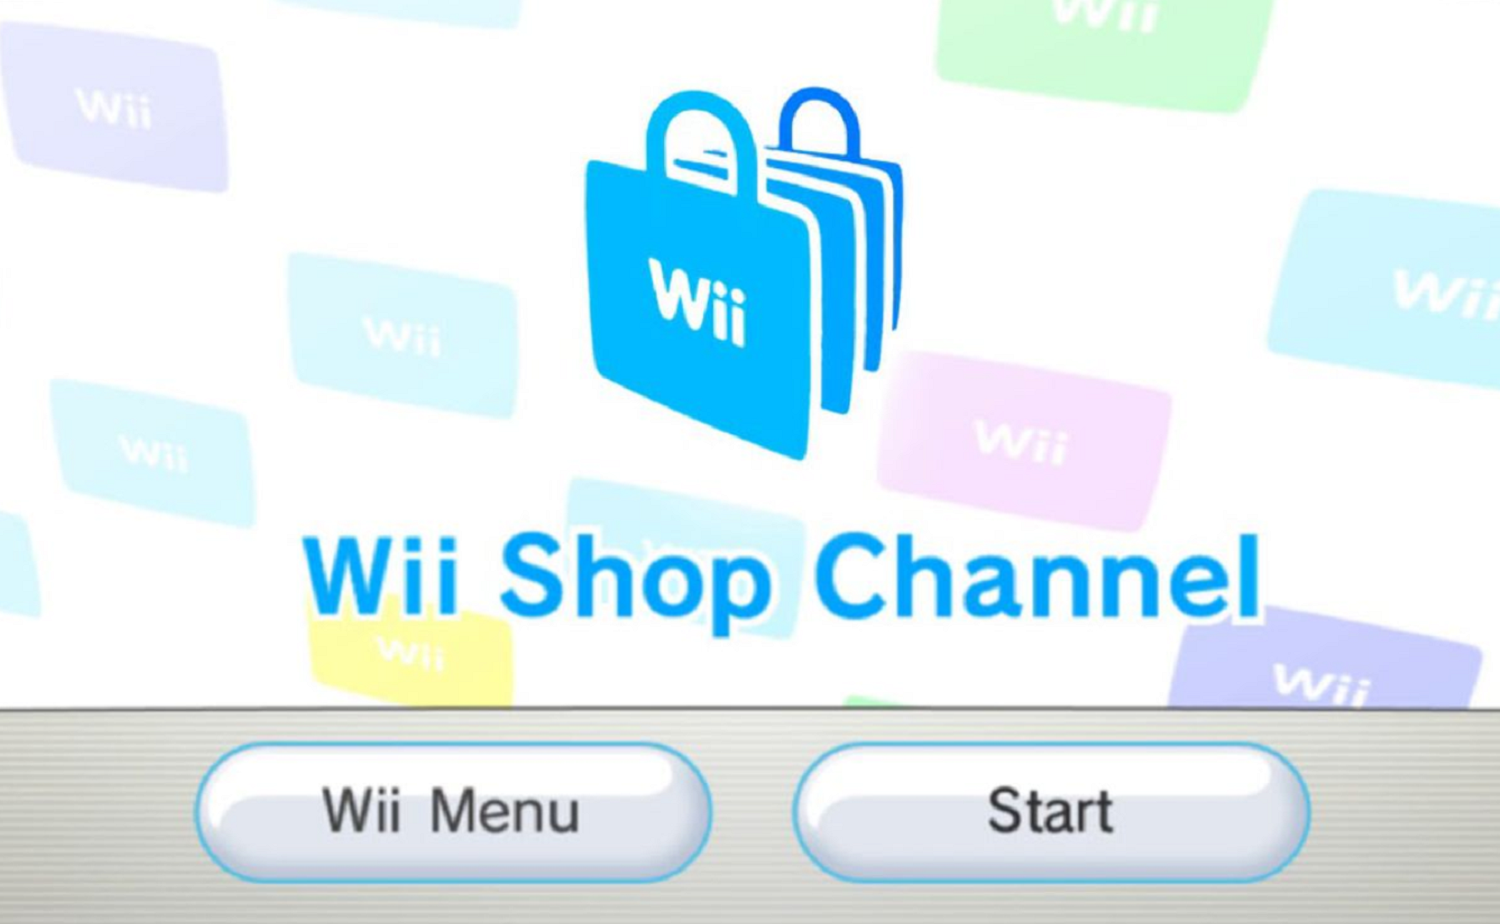 navigate to wii shop channel